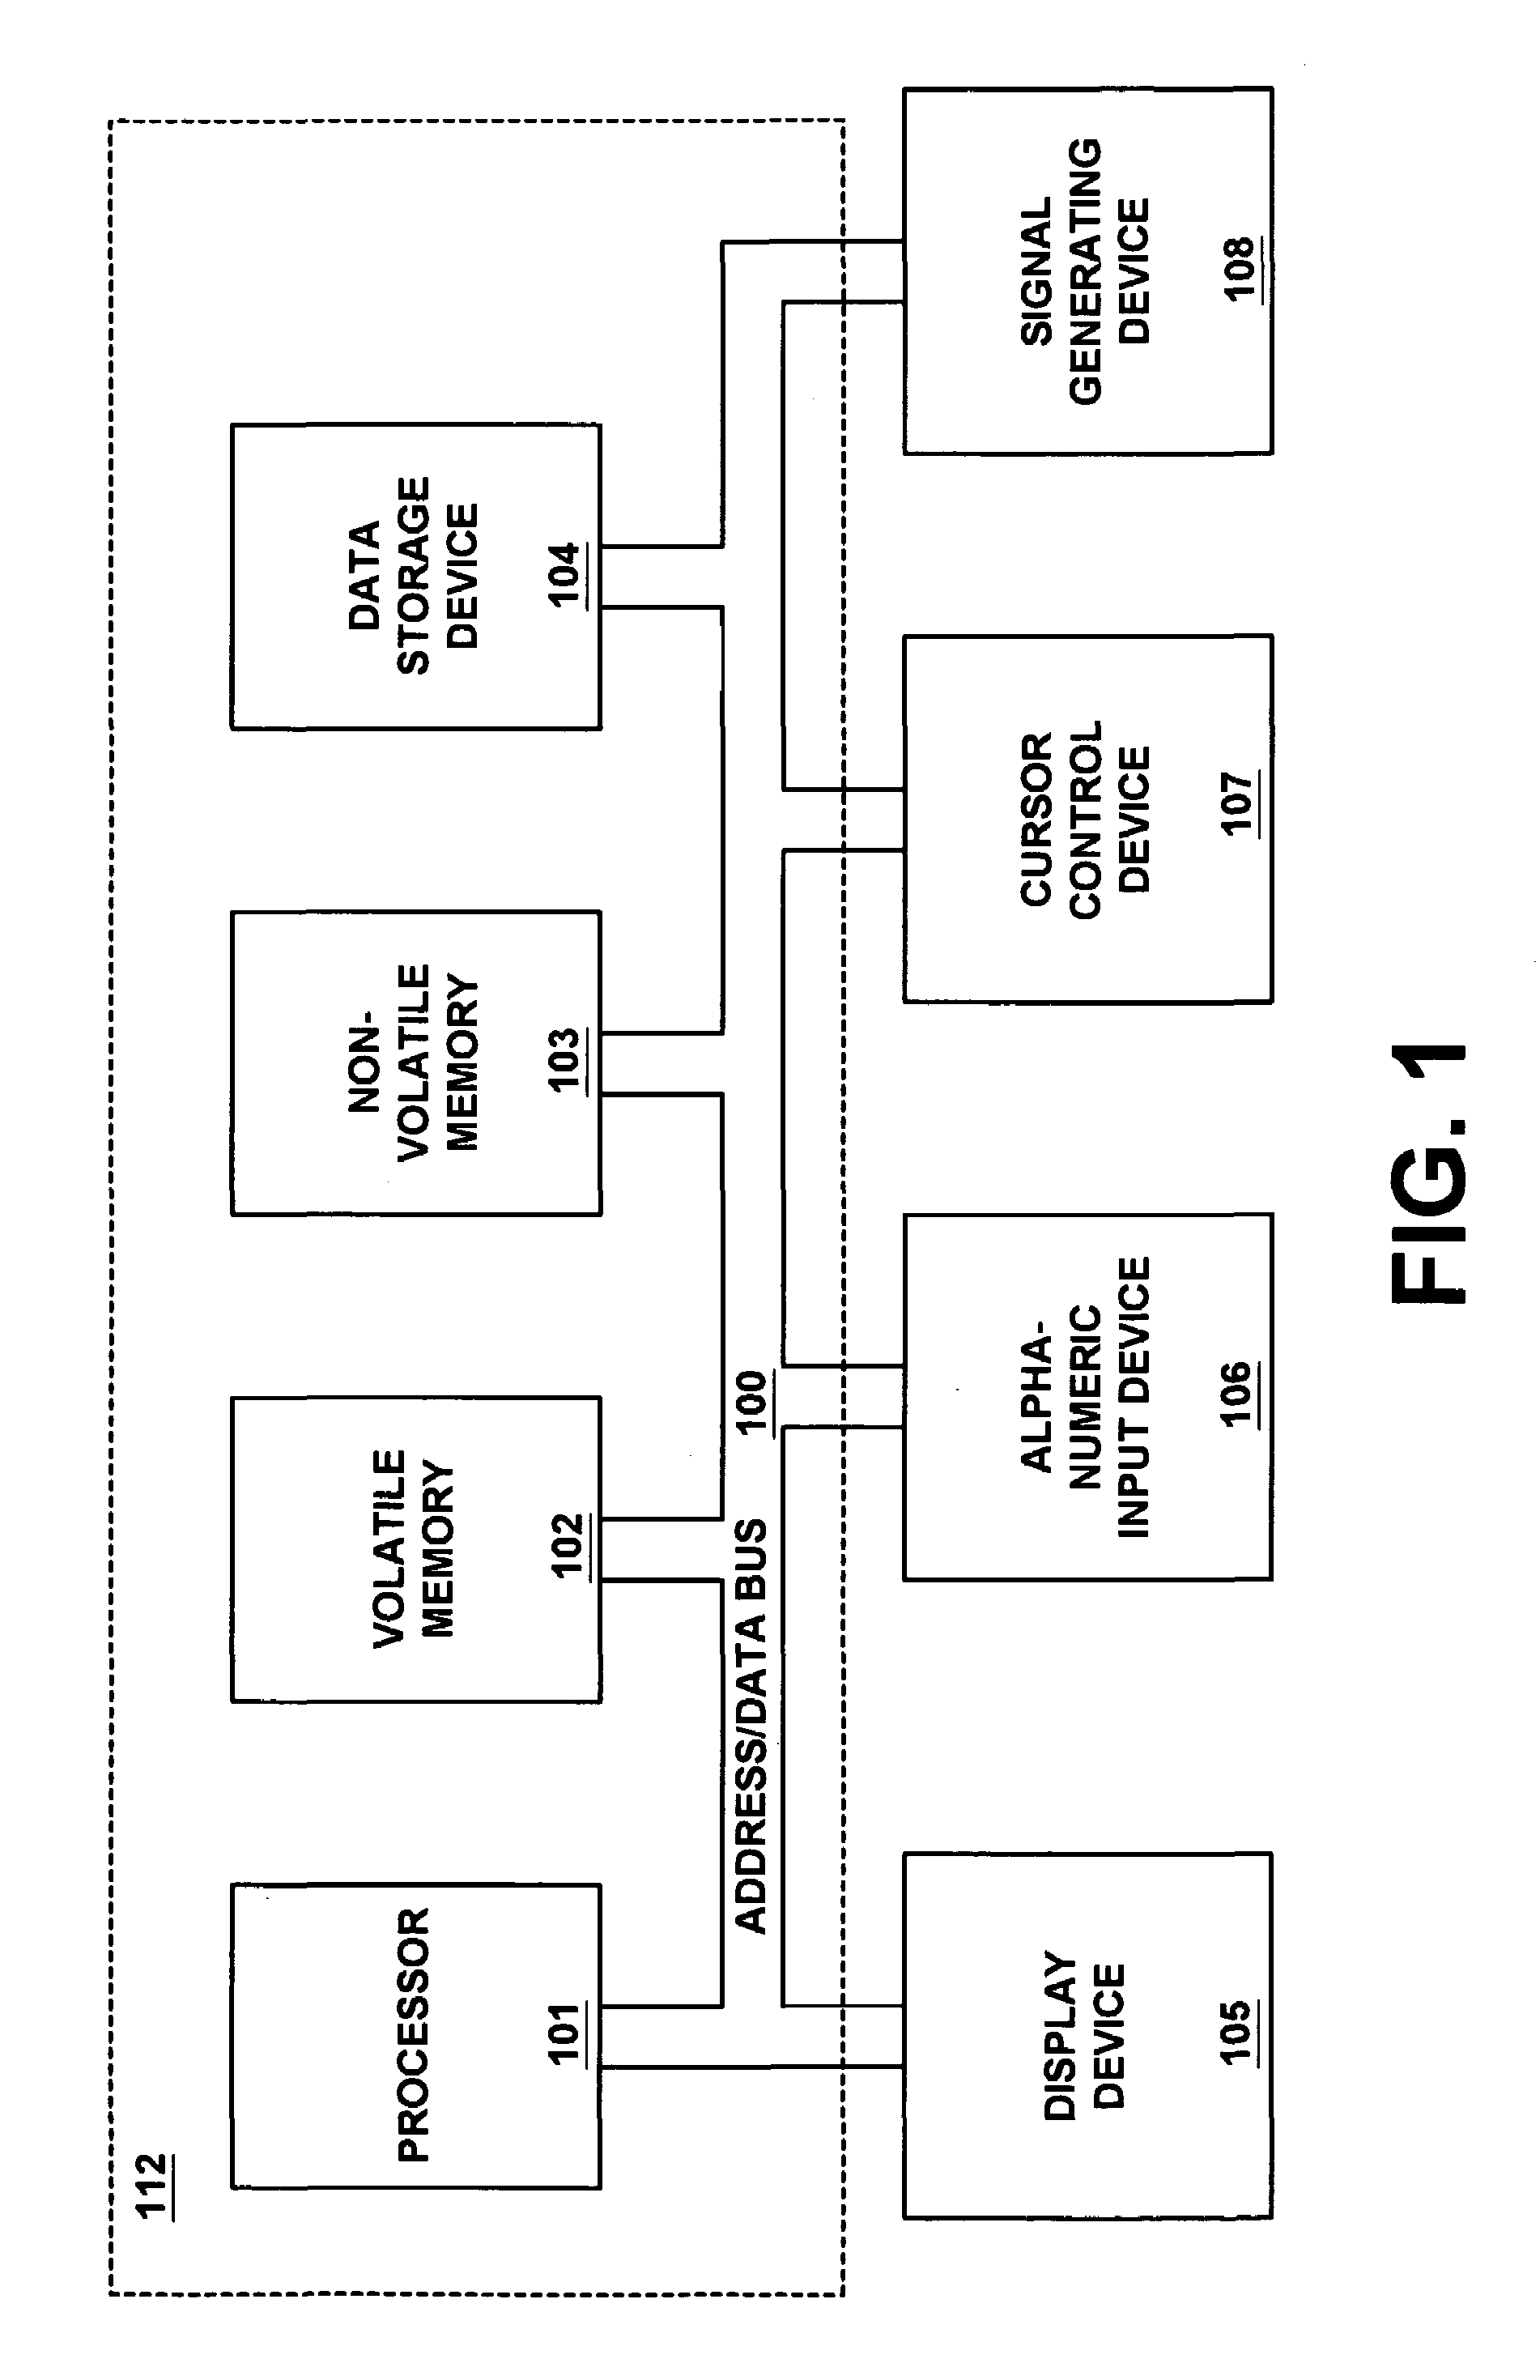 Protected mutual authentication over an unsecured wireless communication channel